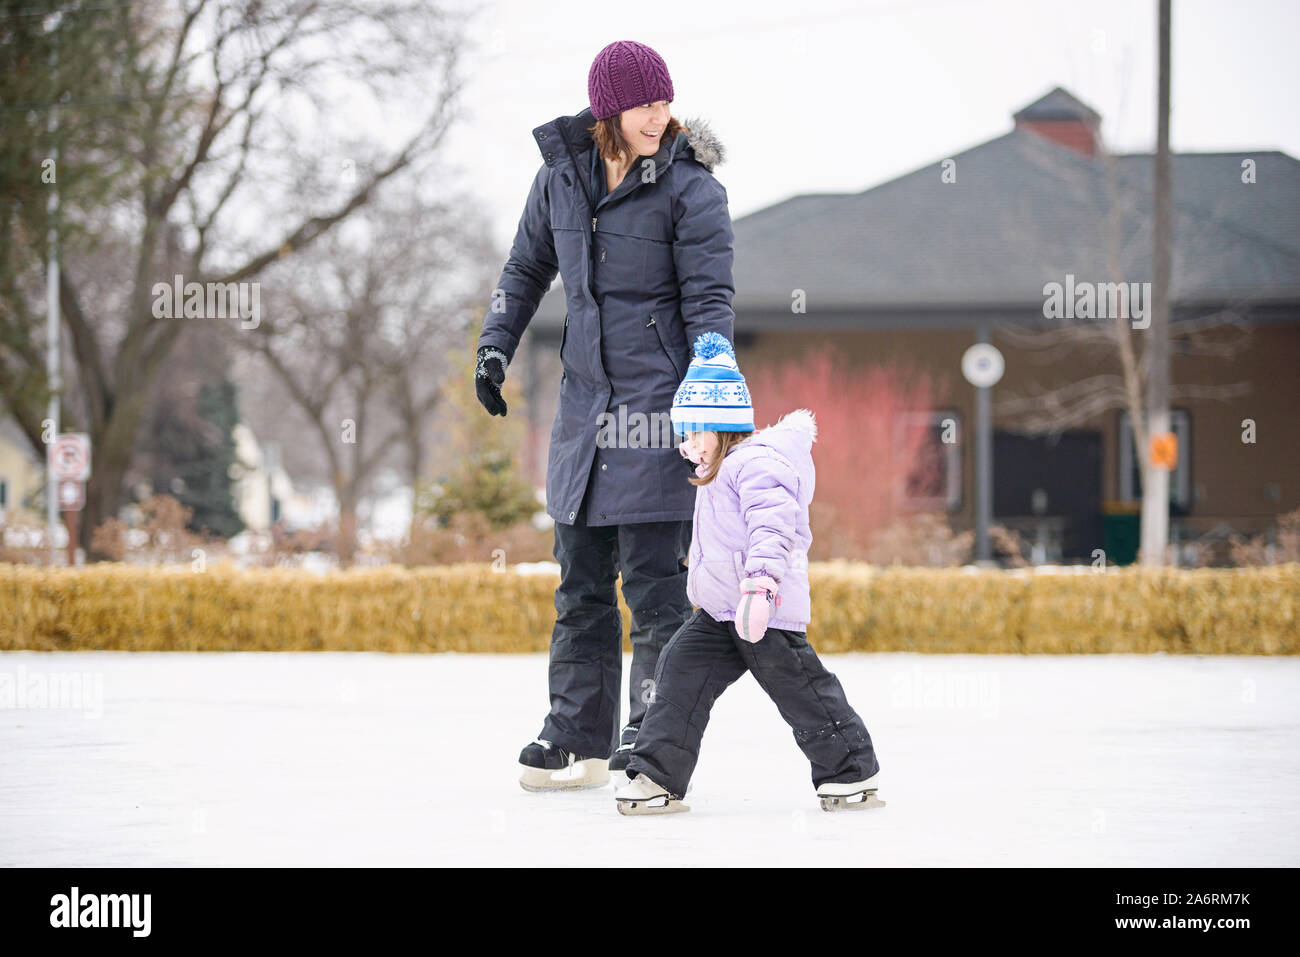 Mother Teaching Daughter to Ice Skate Stock Photo